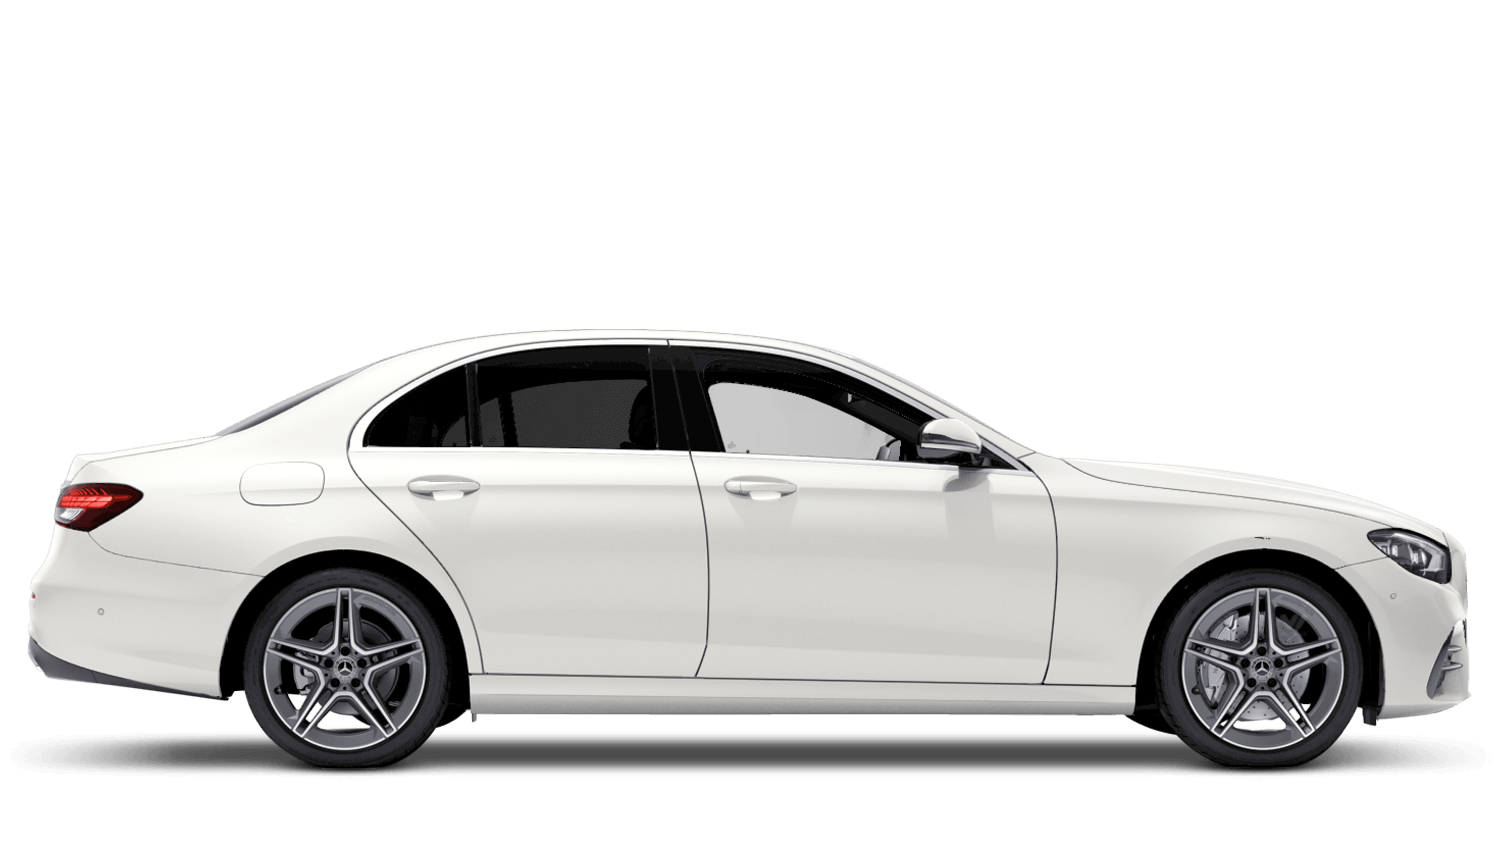 Mercedes A-Class Saloon No Background